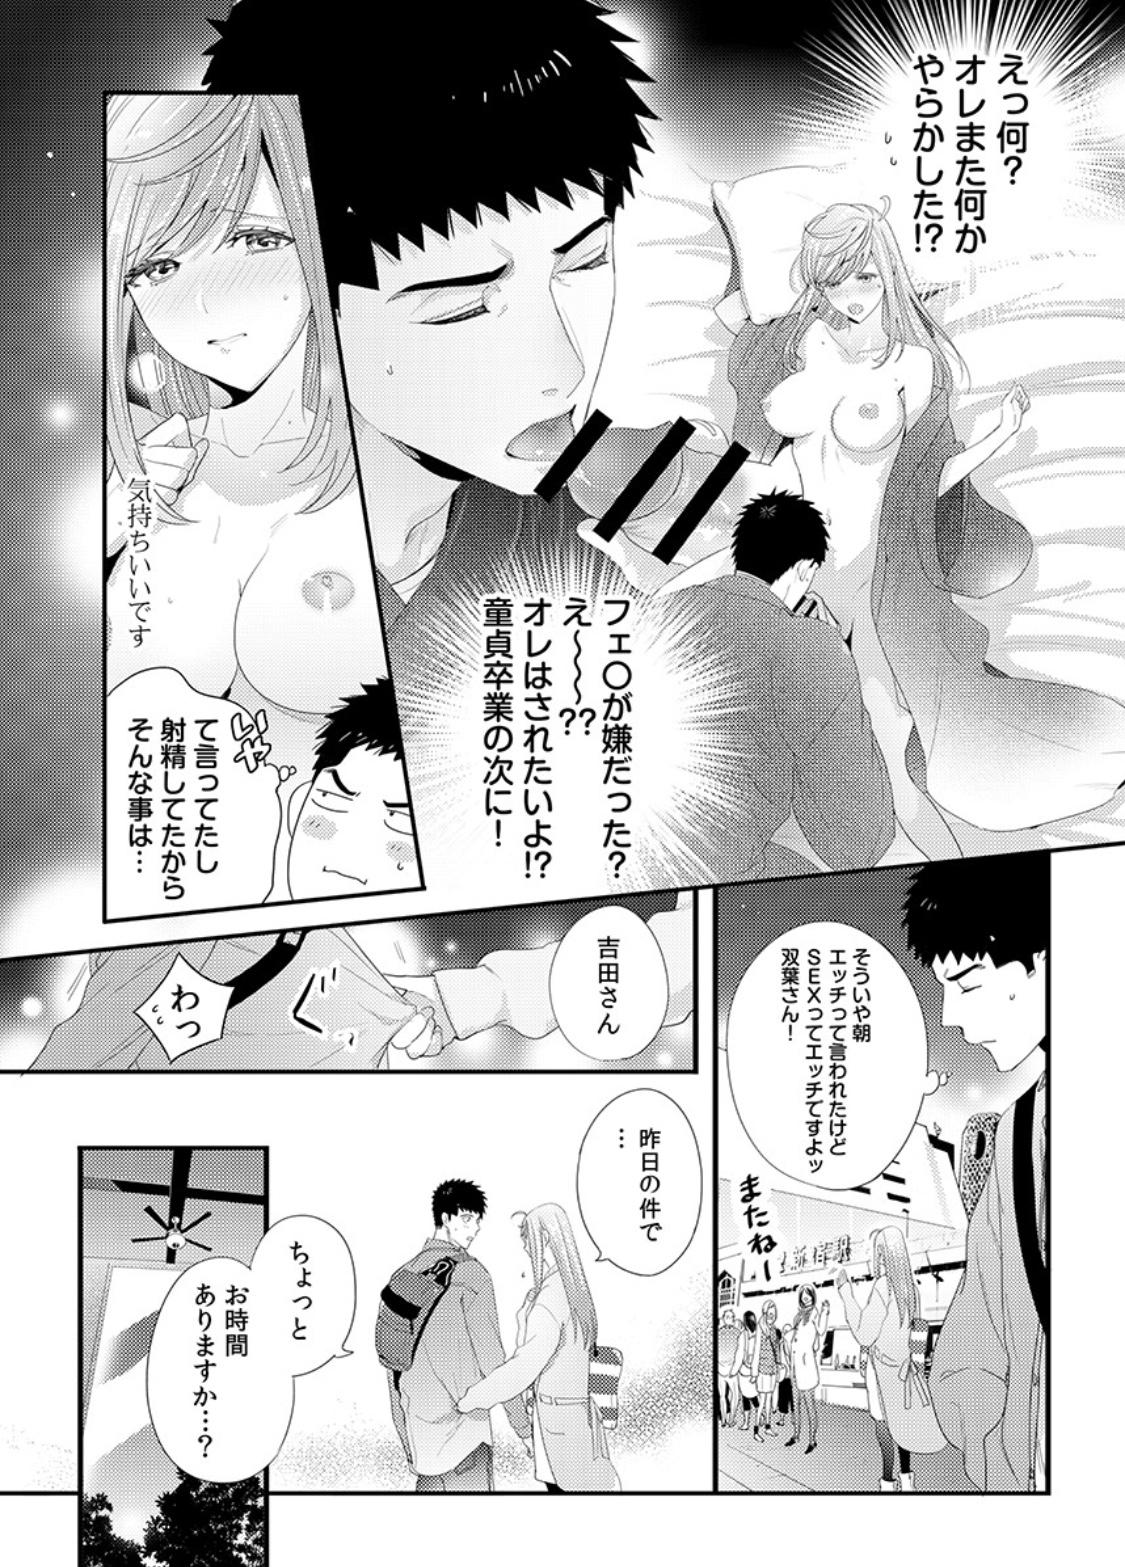 Please Let Me Hold You Futaba-San! Ch. 1-4 34